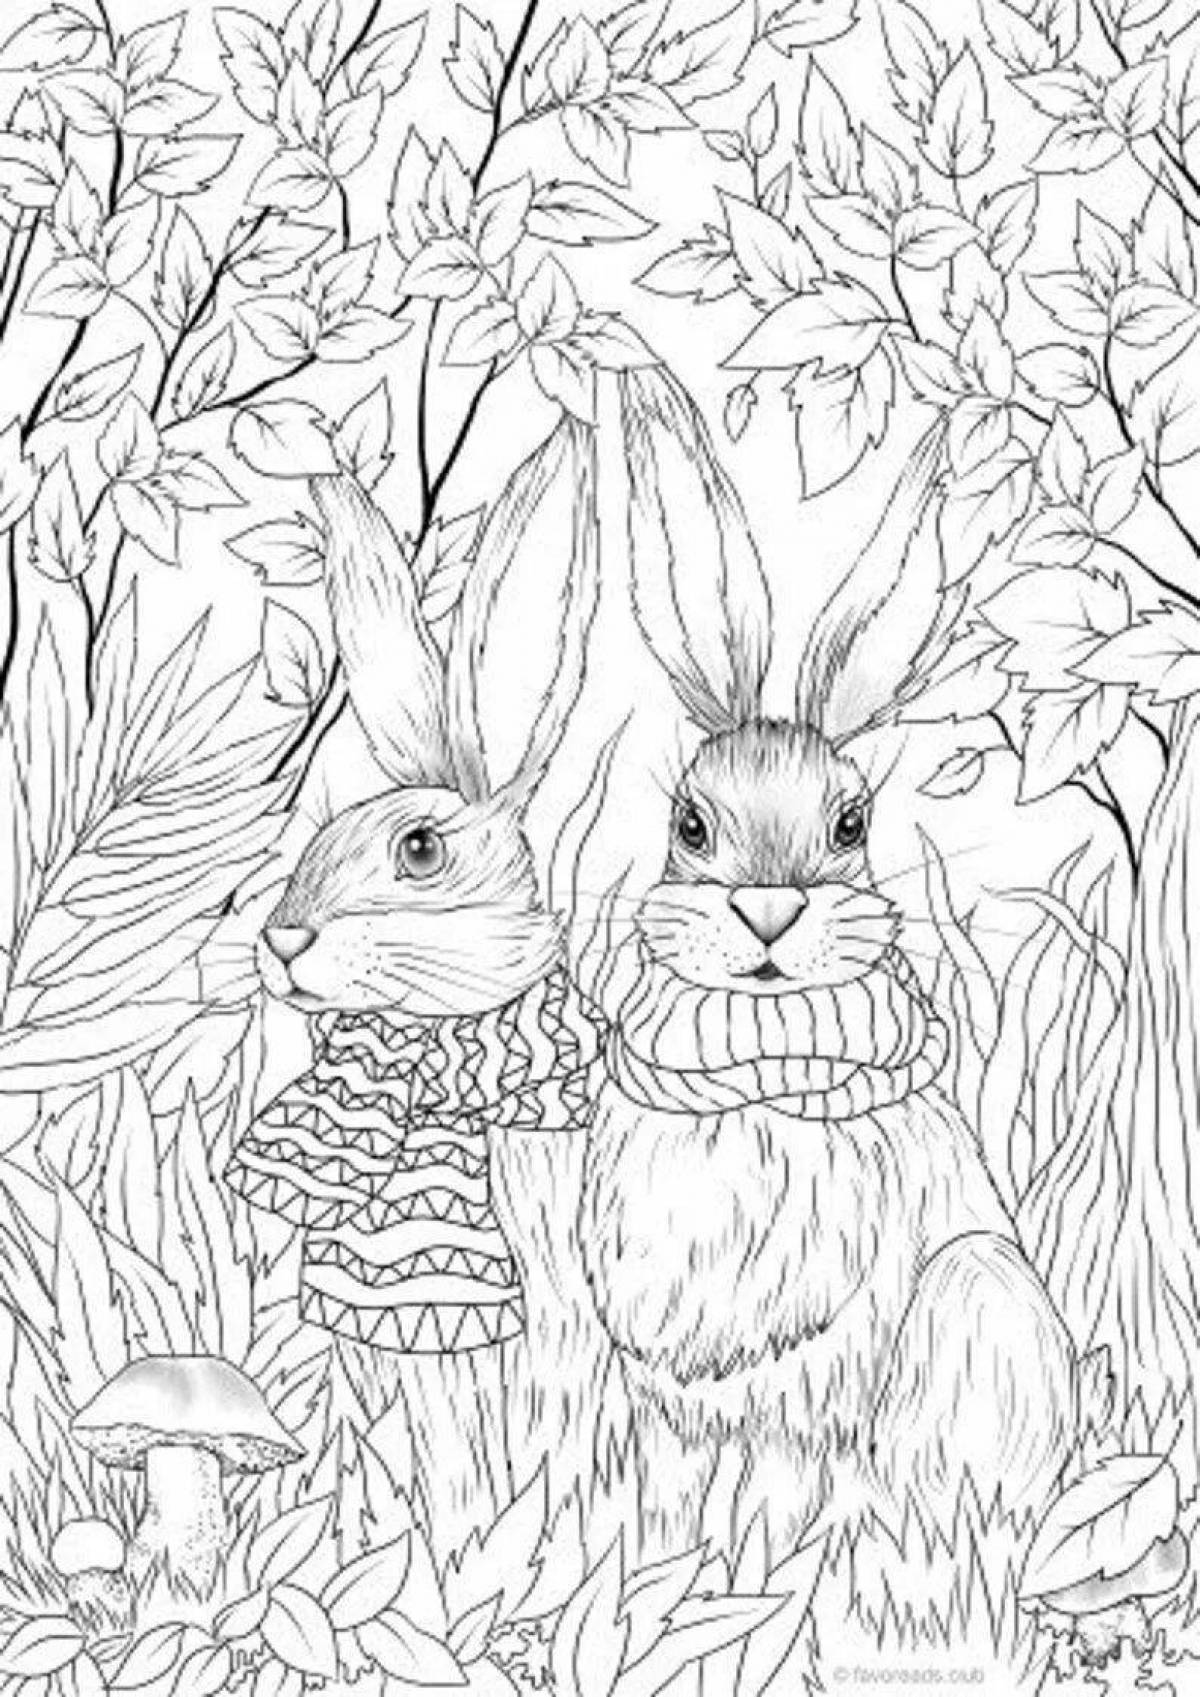 Coloring book blissful antistress hare